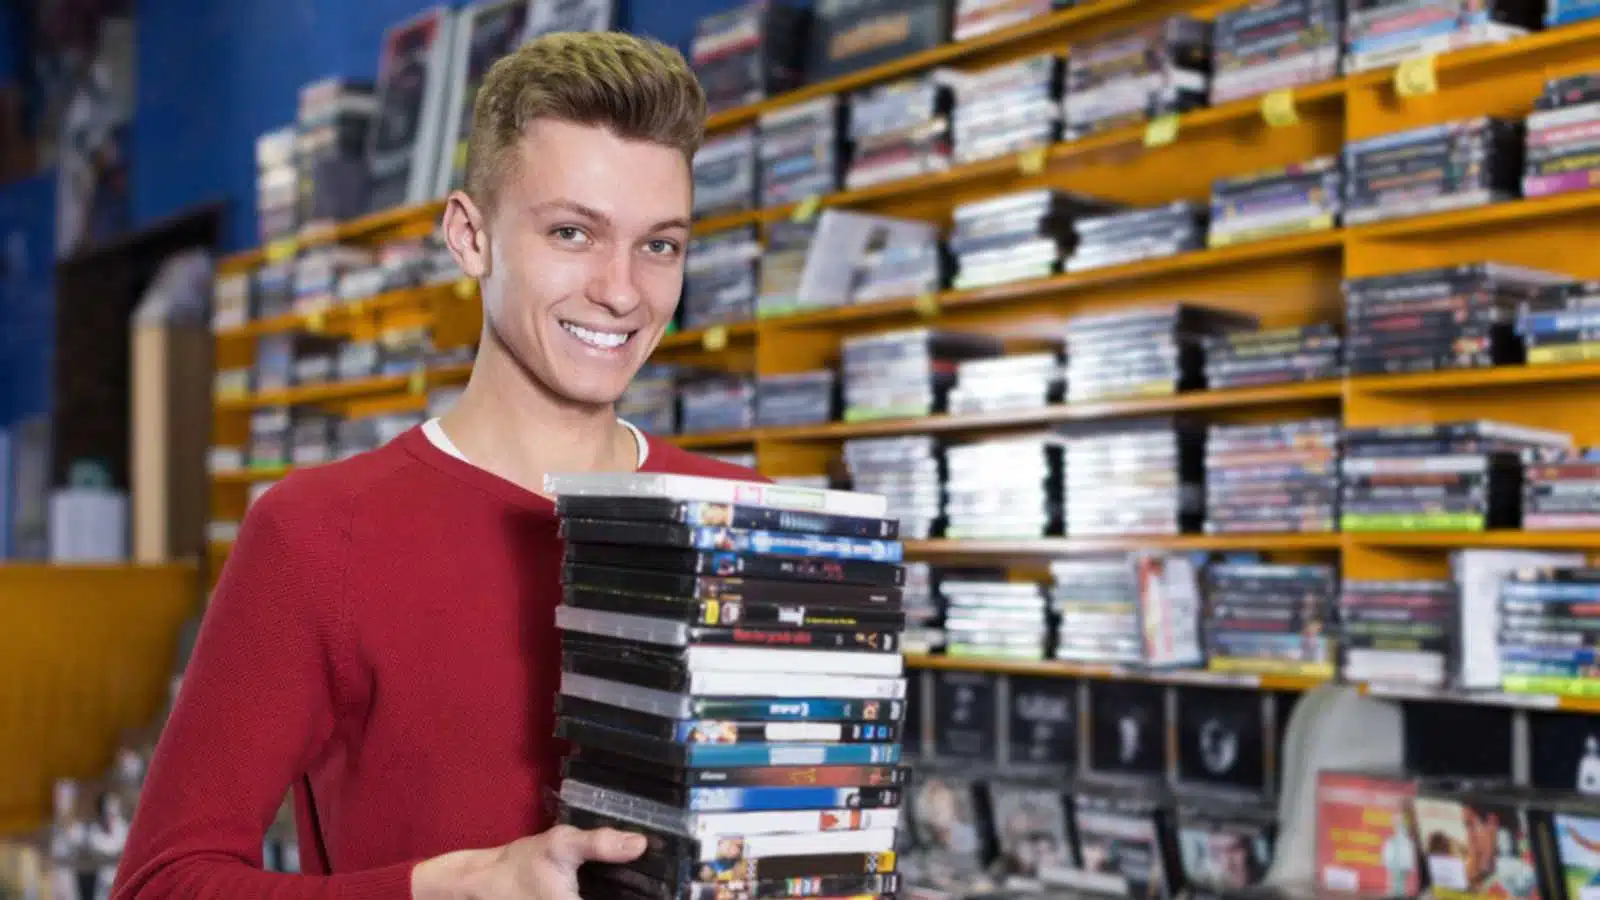 Portrait of smiling young guy customer holding stack of DVDs in shop